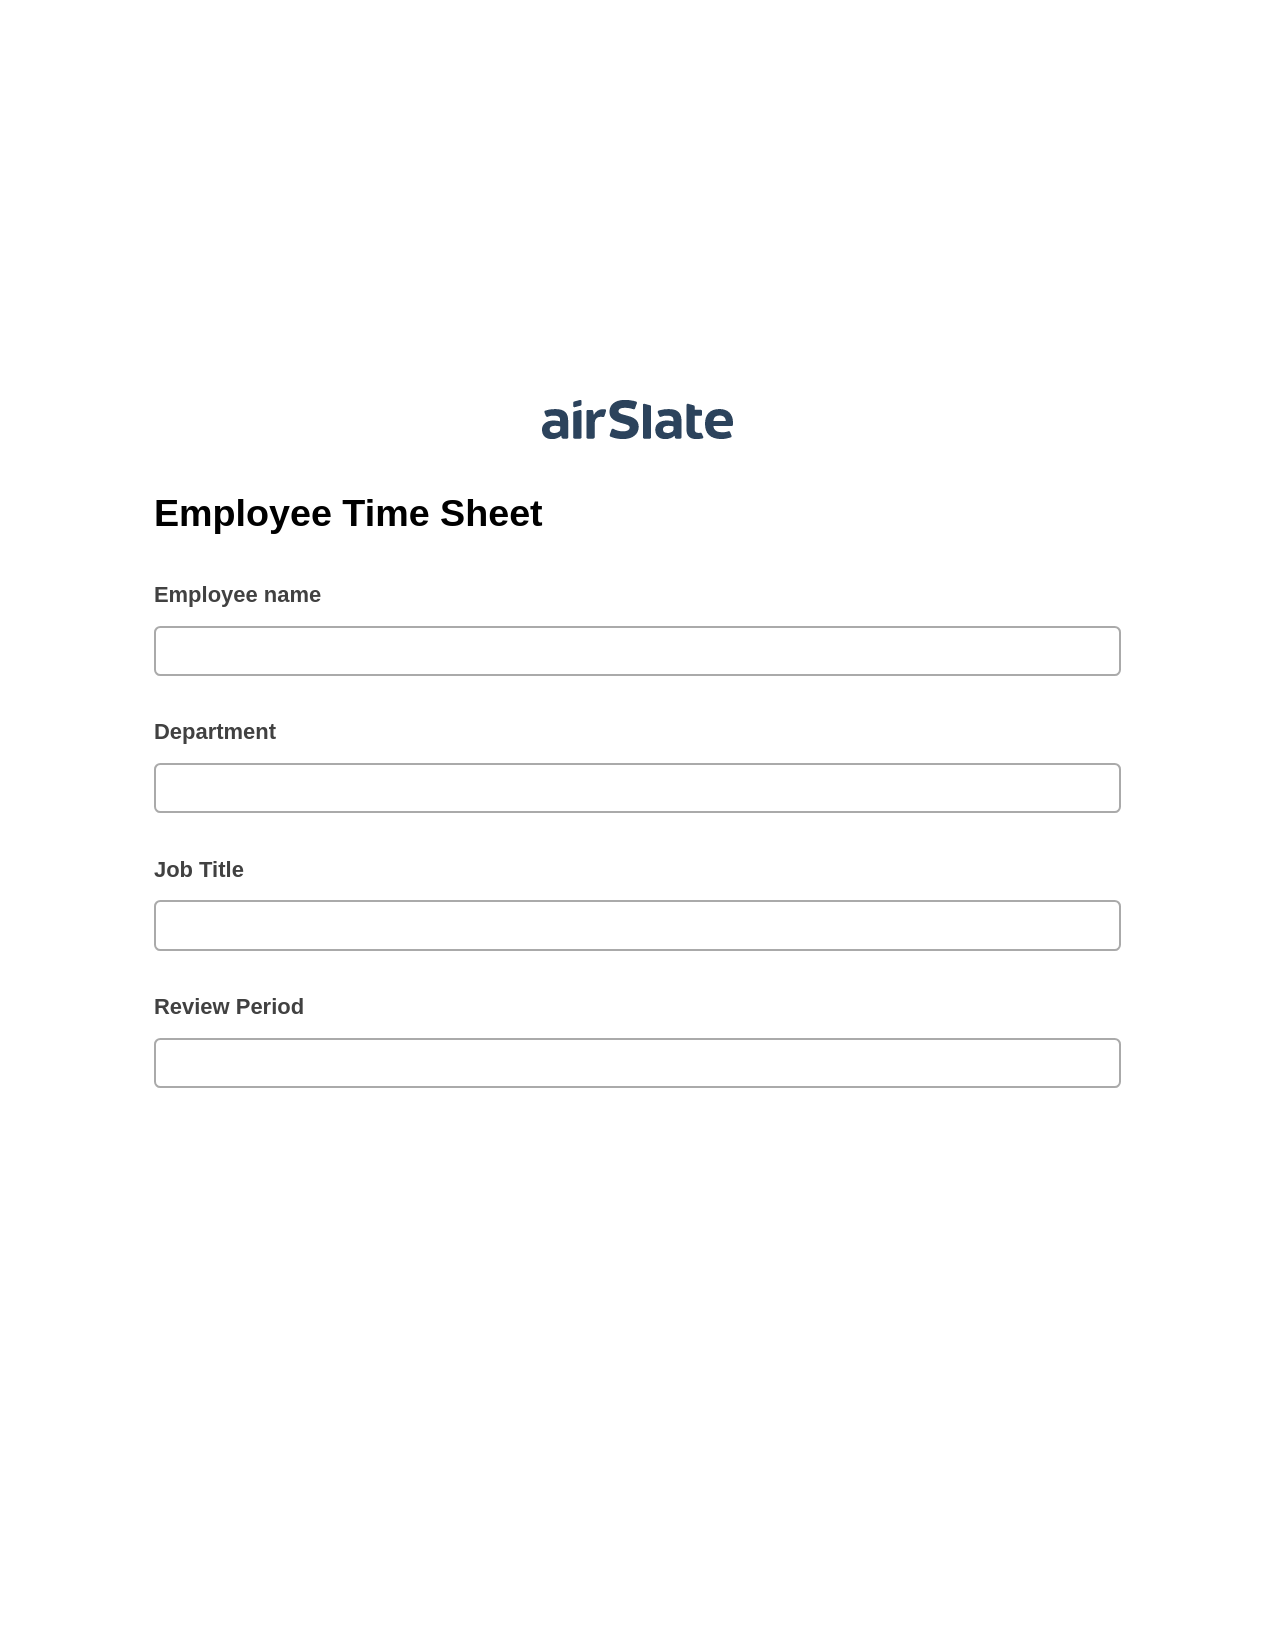 Multirole Employee Time Sheet Pre-fill from another Slate Bot, Create Slate every Google Sheet Update Bot, Archive to Dropbox Bot